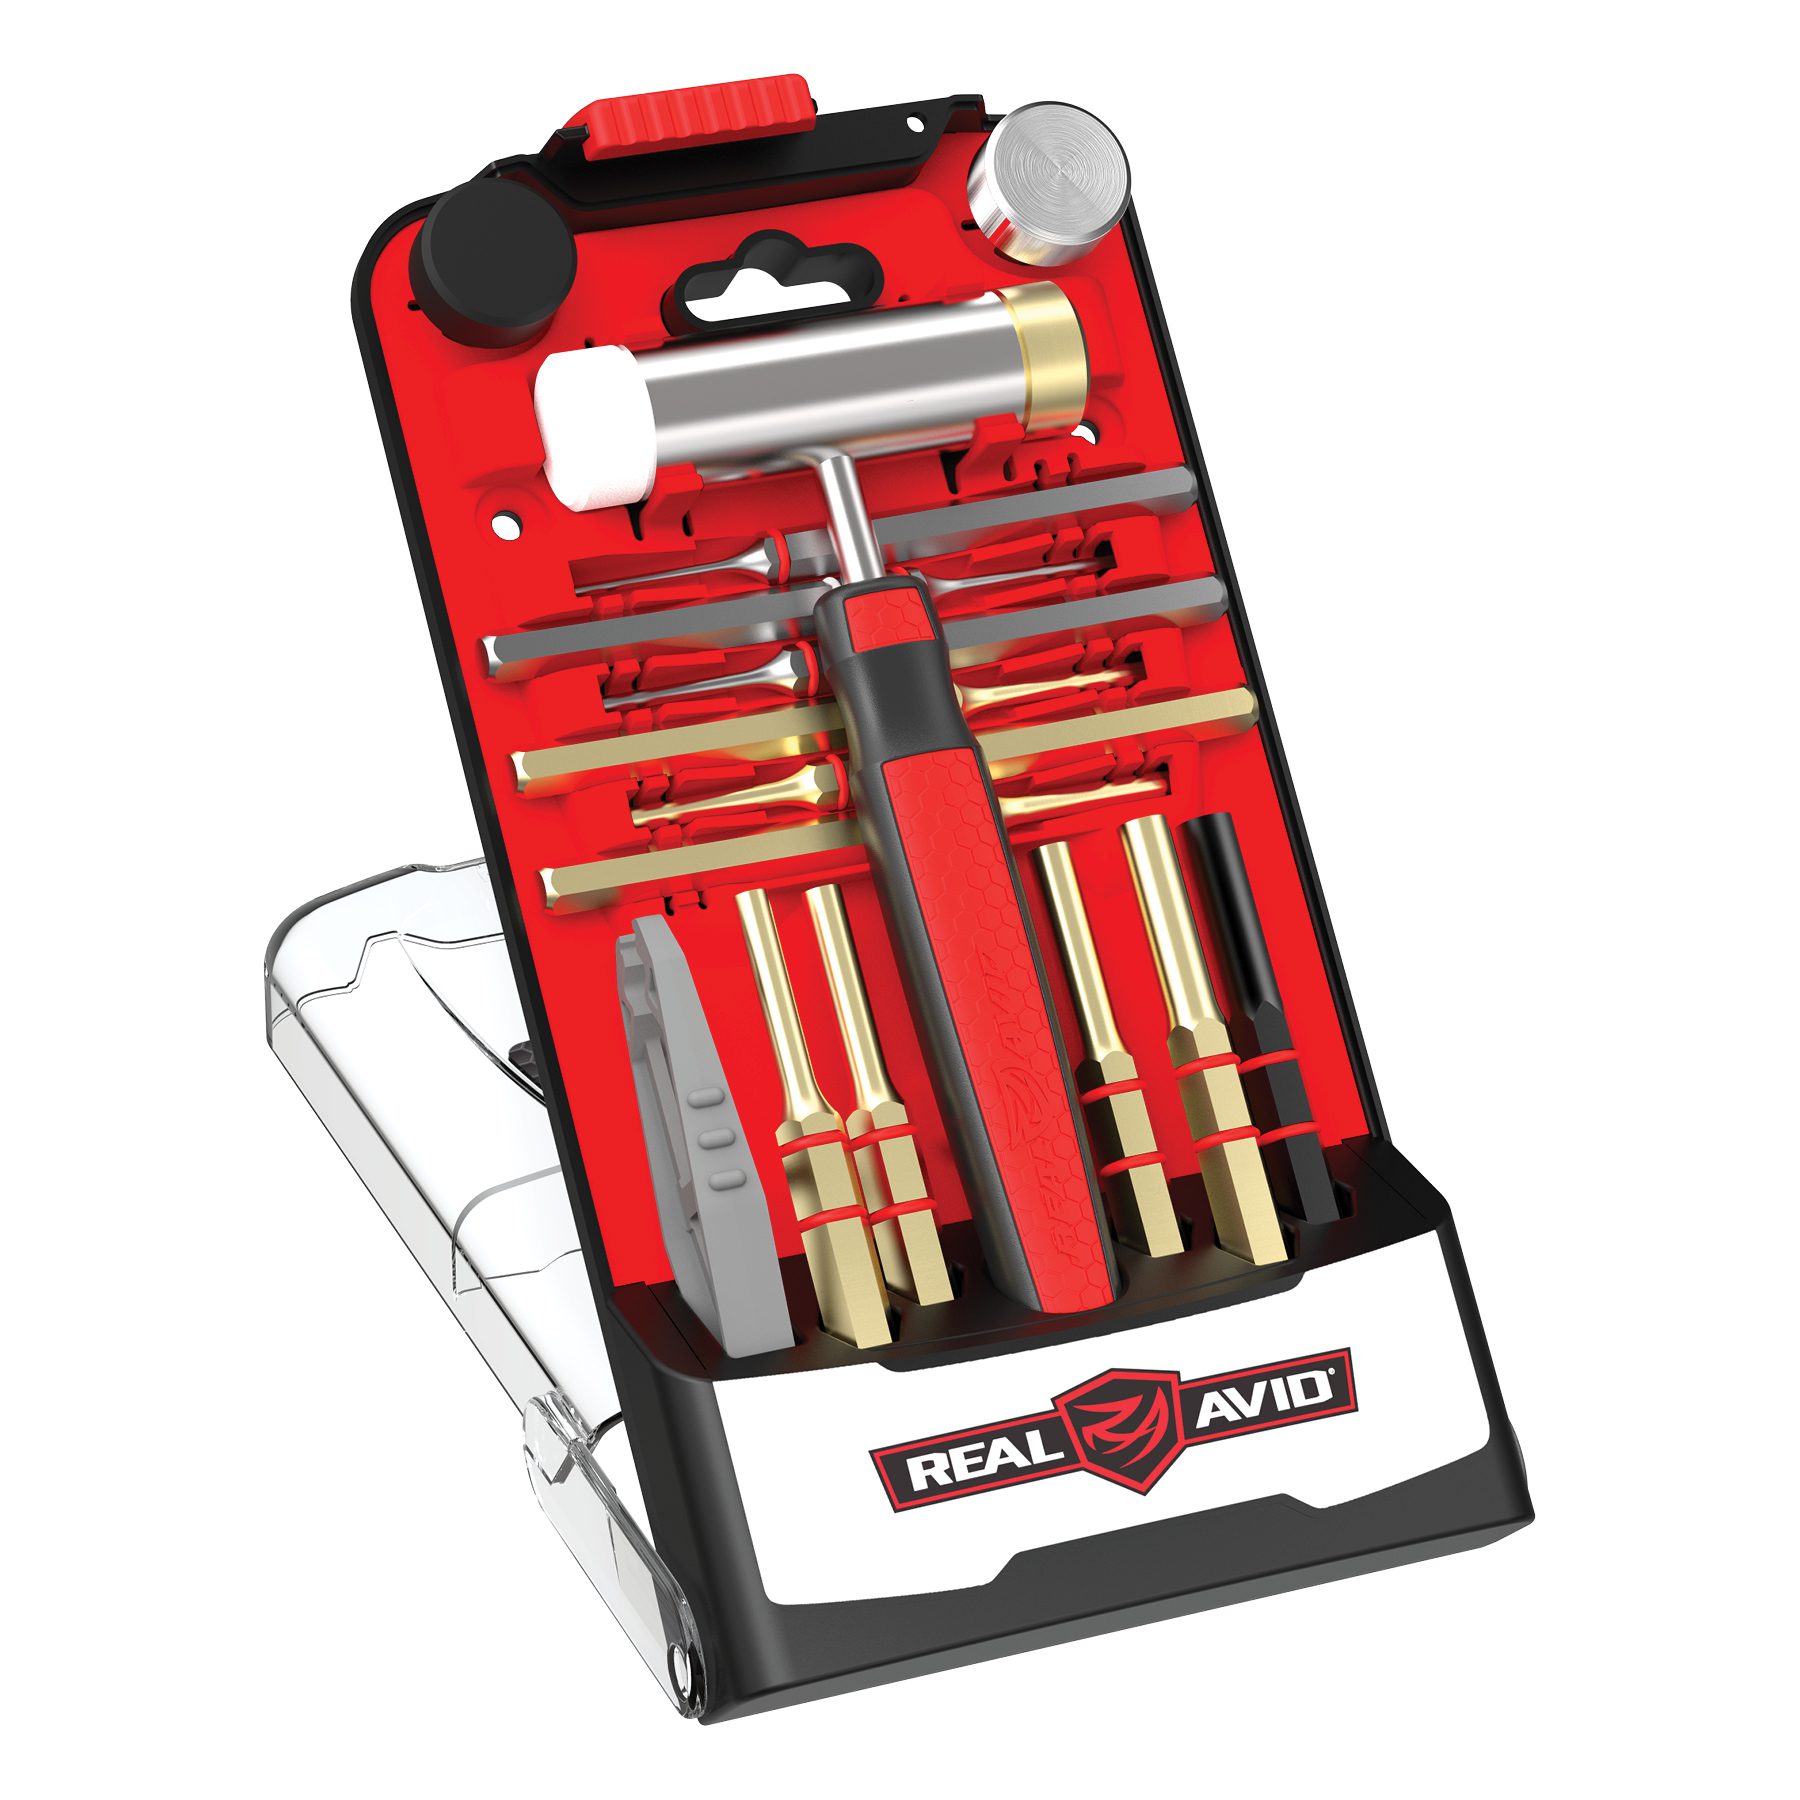 a tool set in a case with tools inside